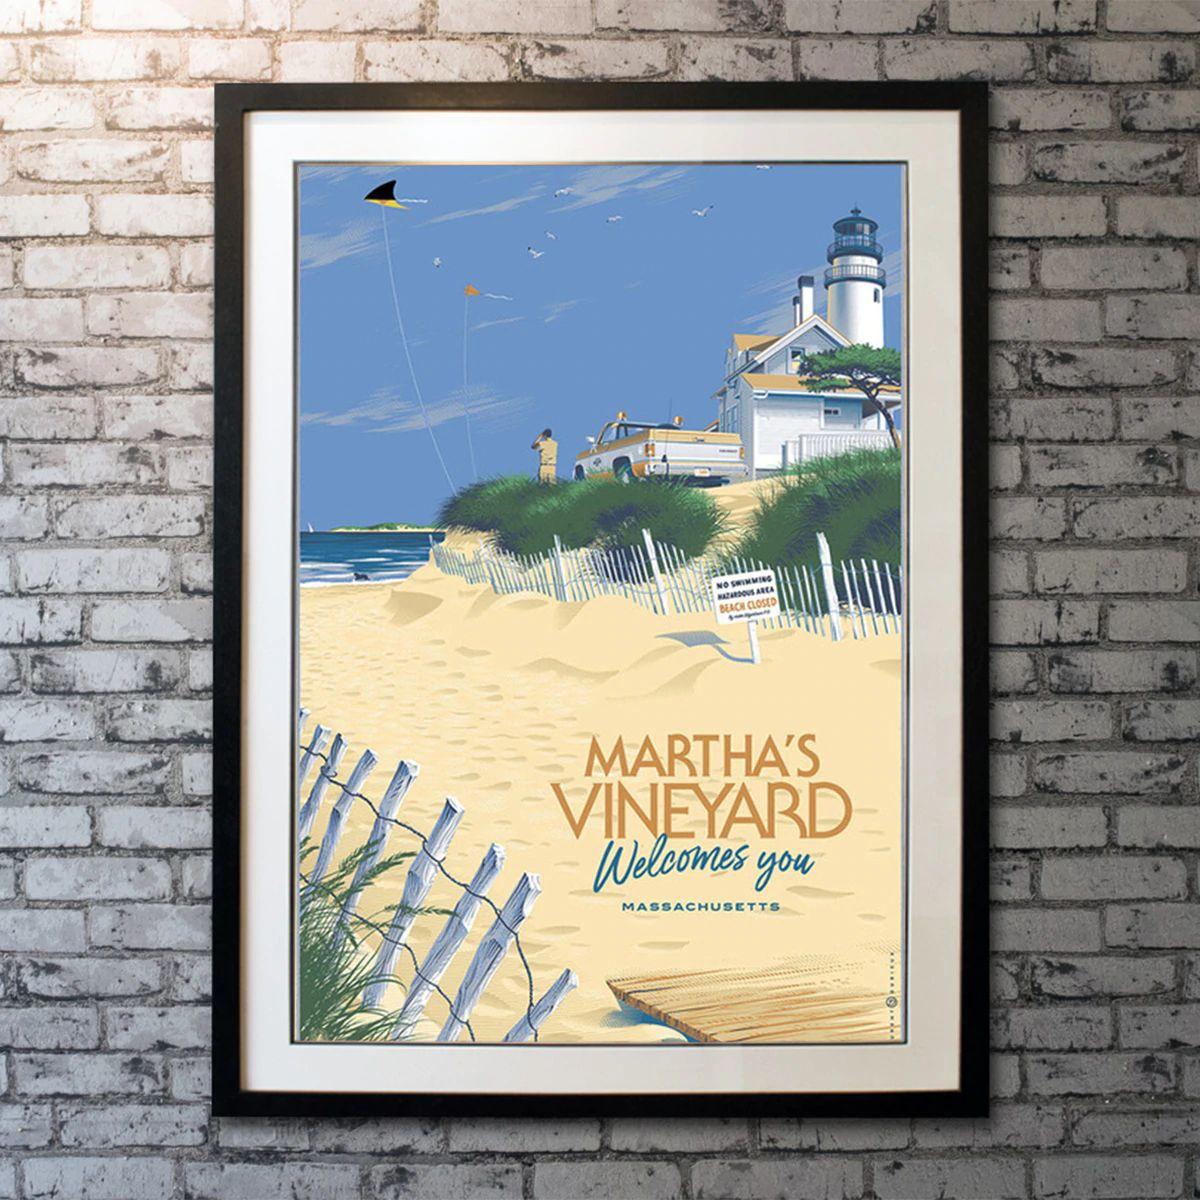 Jaws *Martha's Vineyard Poster*, Unframed Poster, 2021

Limited Edition Print (24 x 36). 2021 Limited Edition screen print of 575 by artist Laurent Durieux for 